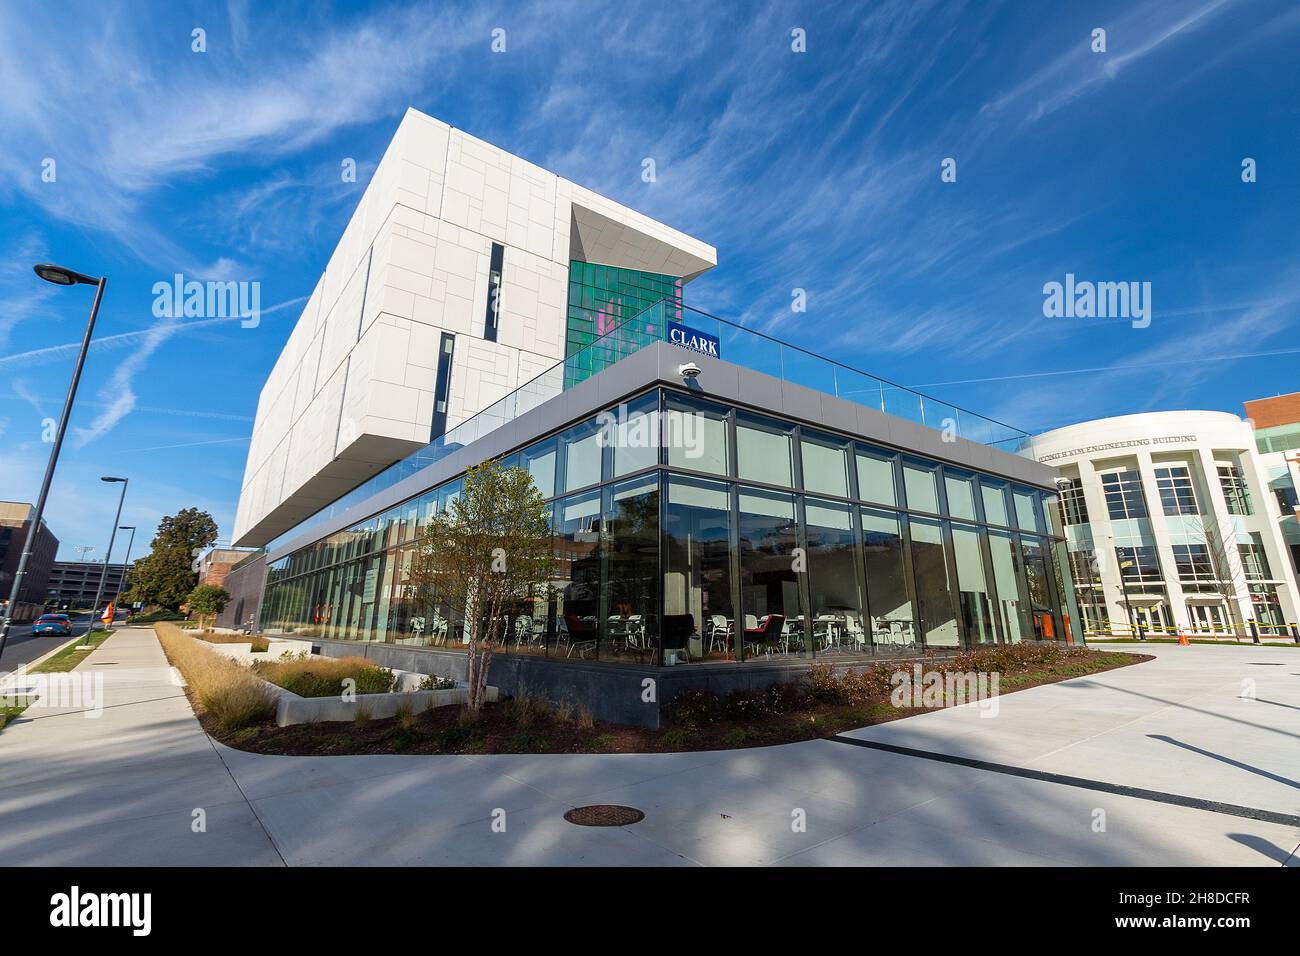 COLLEGE PARK, MD, USA - NOVEMBER 20: Kim Engineering Building on November 20, 2021 at the University of Maryland in College Park, Maryland. Stock Photo